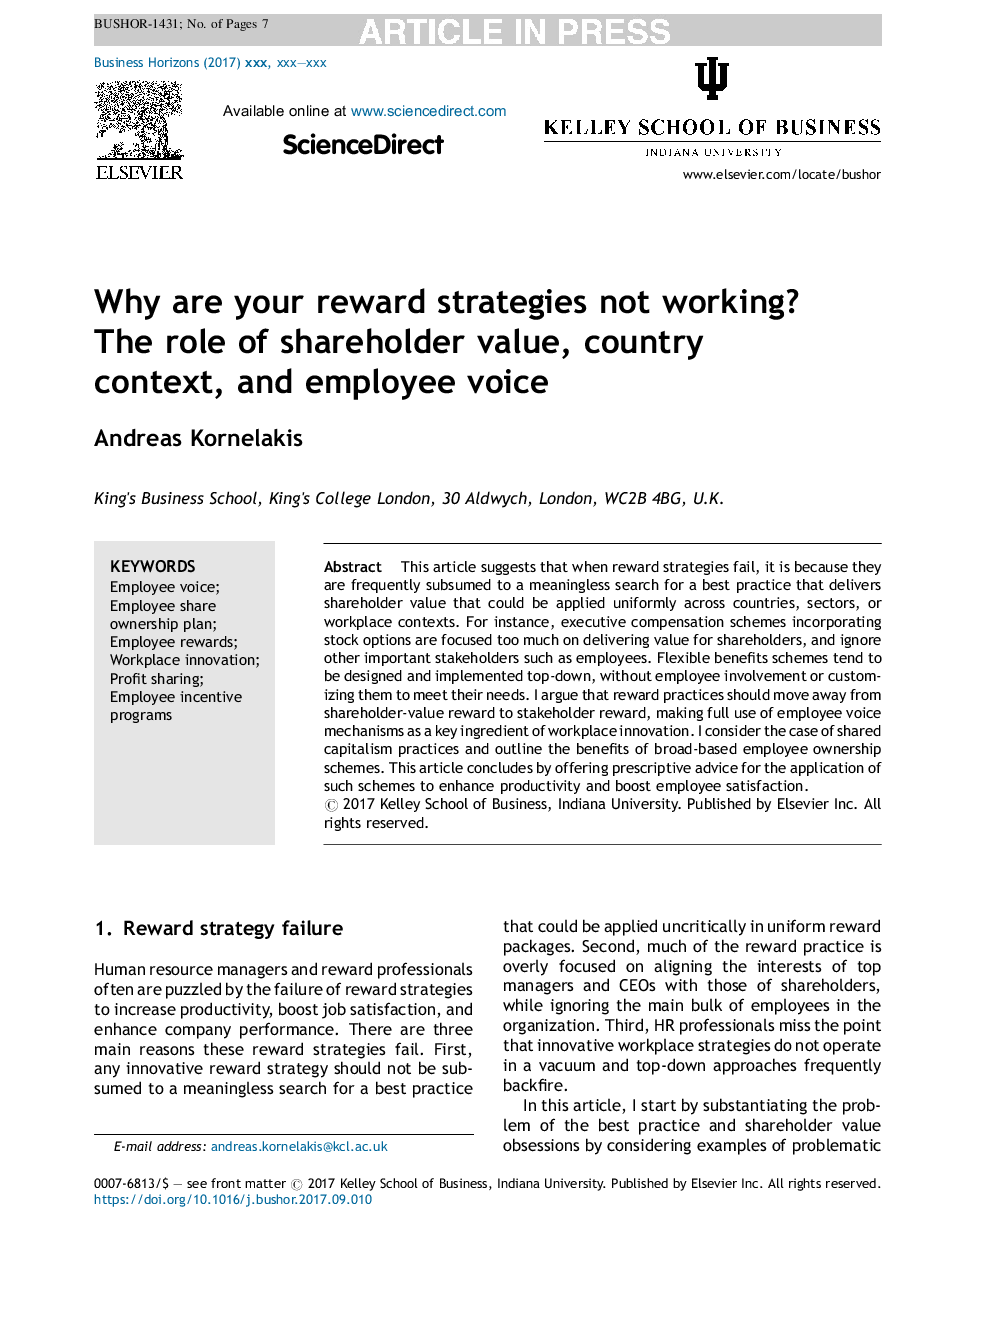 Why are your reward strategies not working? The role of shareholder value, country context, and employee voice